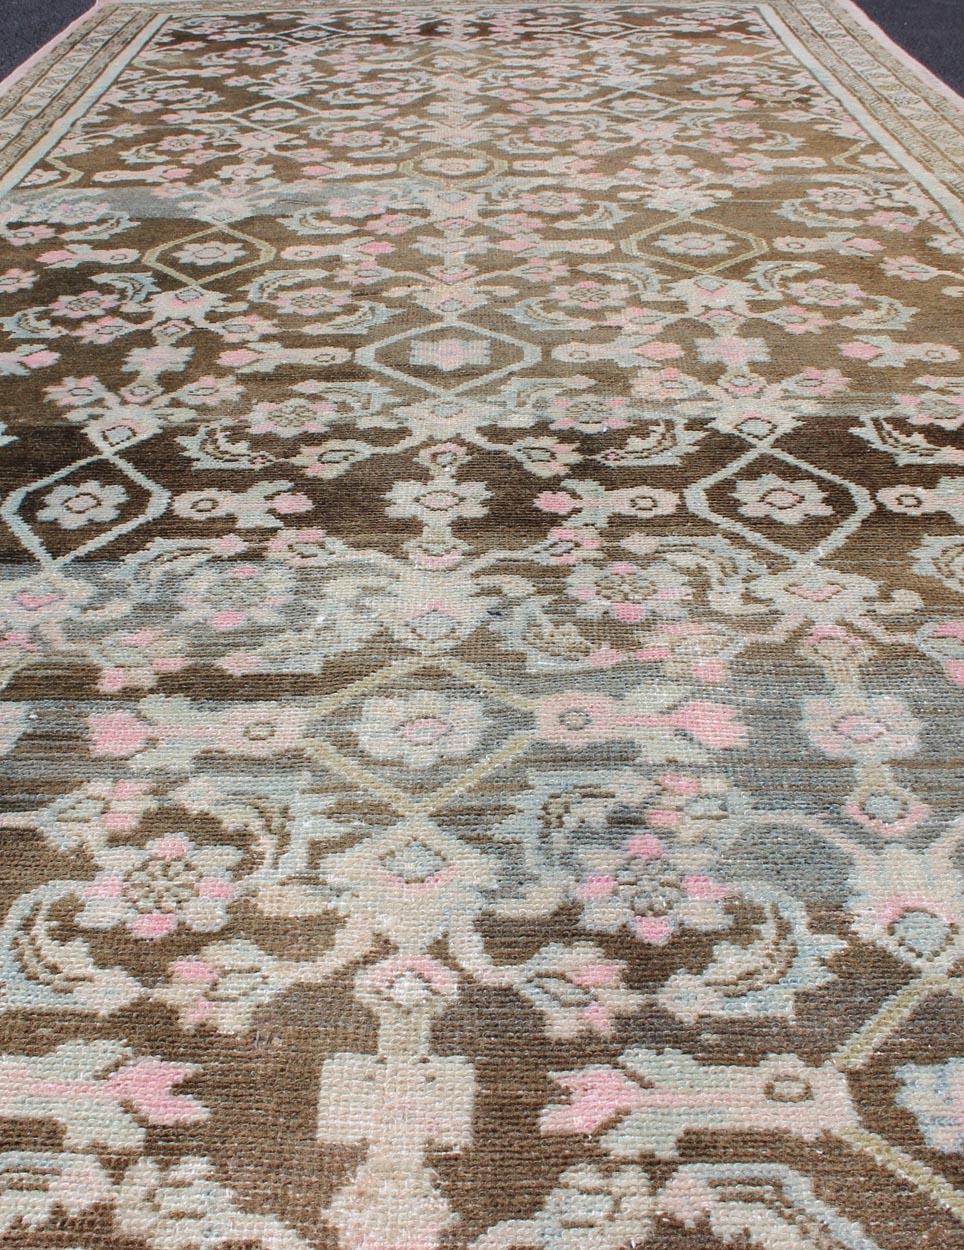 Pink, Gray, Charcoal and Brown Vintage Persian Hamadan Rug with Flower Design For Sale 3